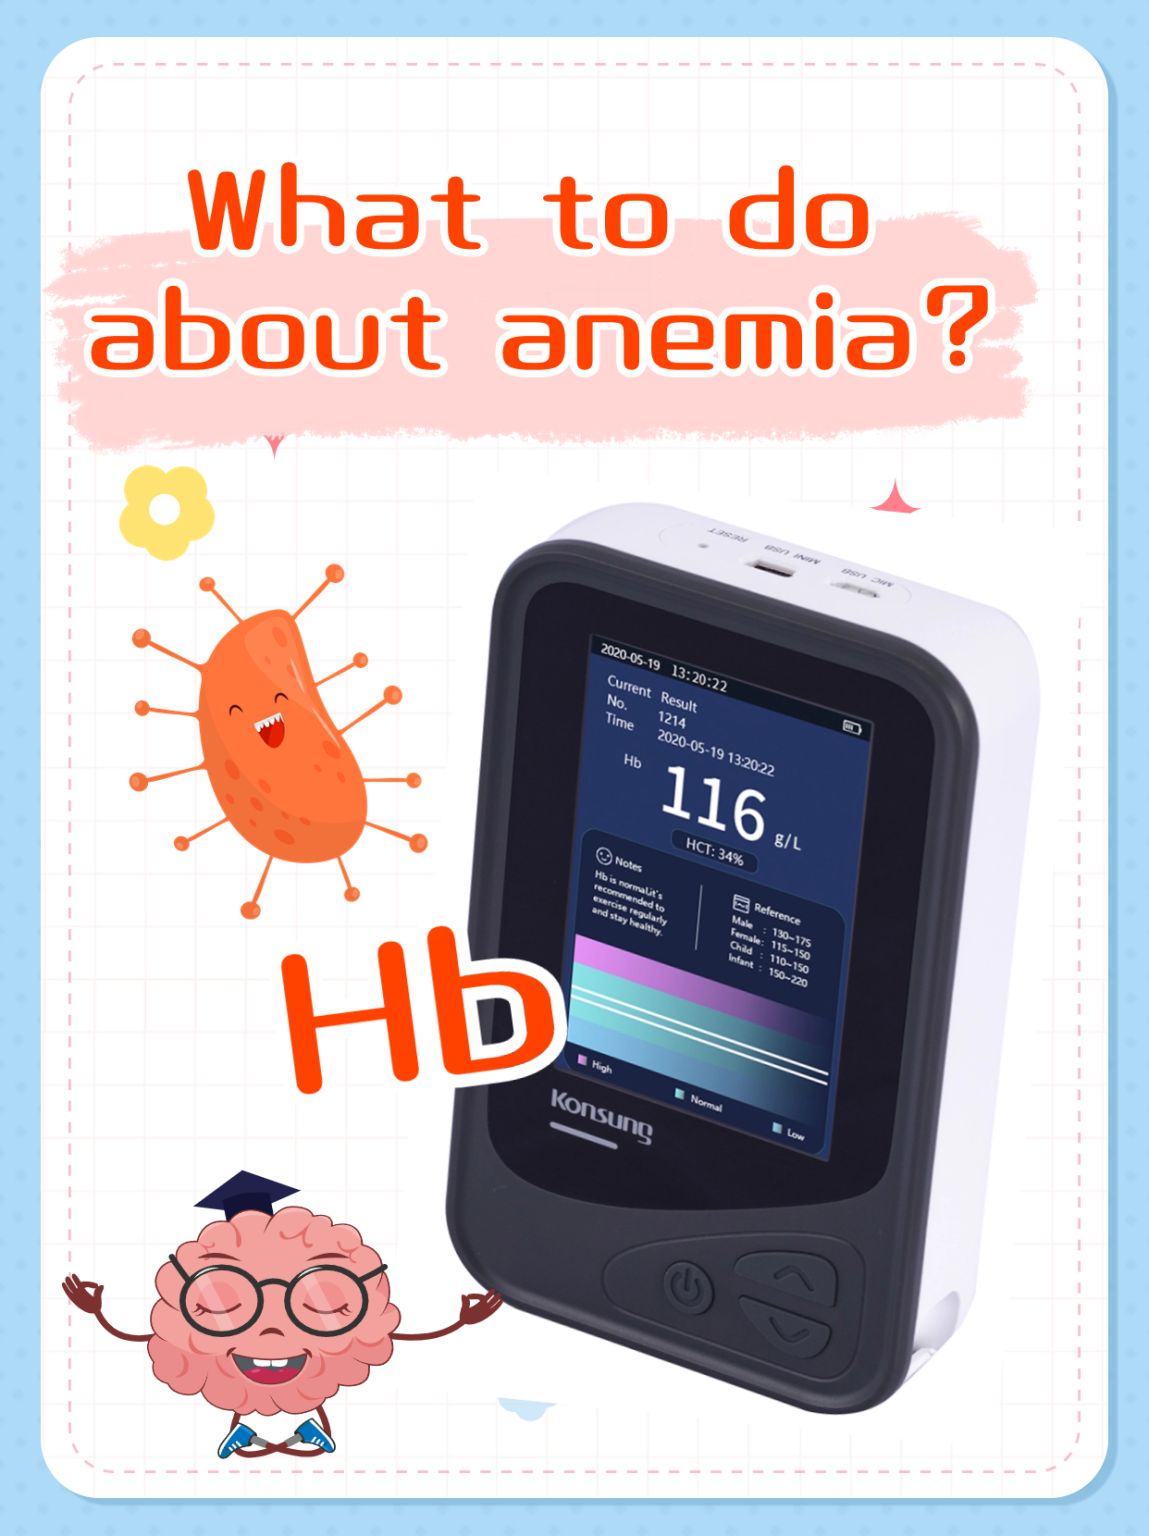 What do you know about anemia? What do you do if you’re anemic?